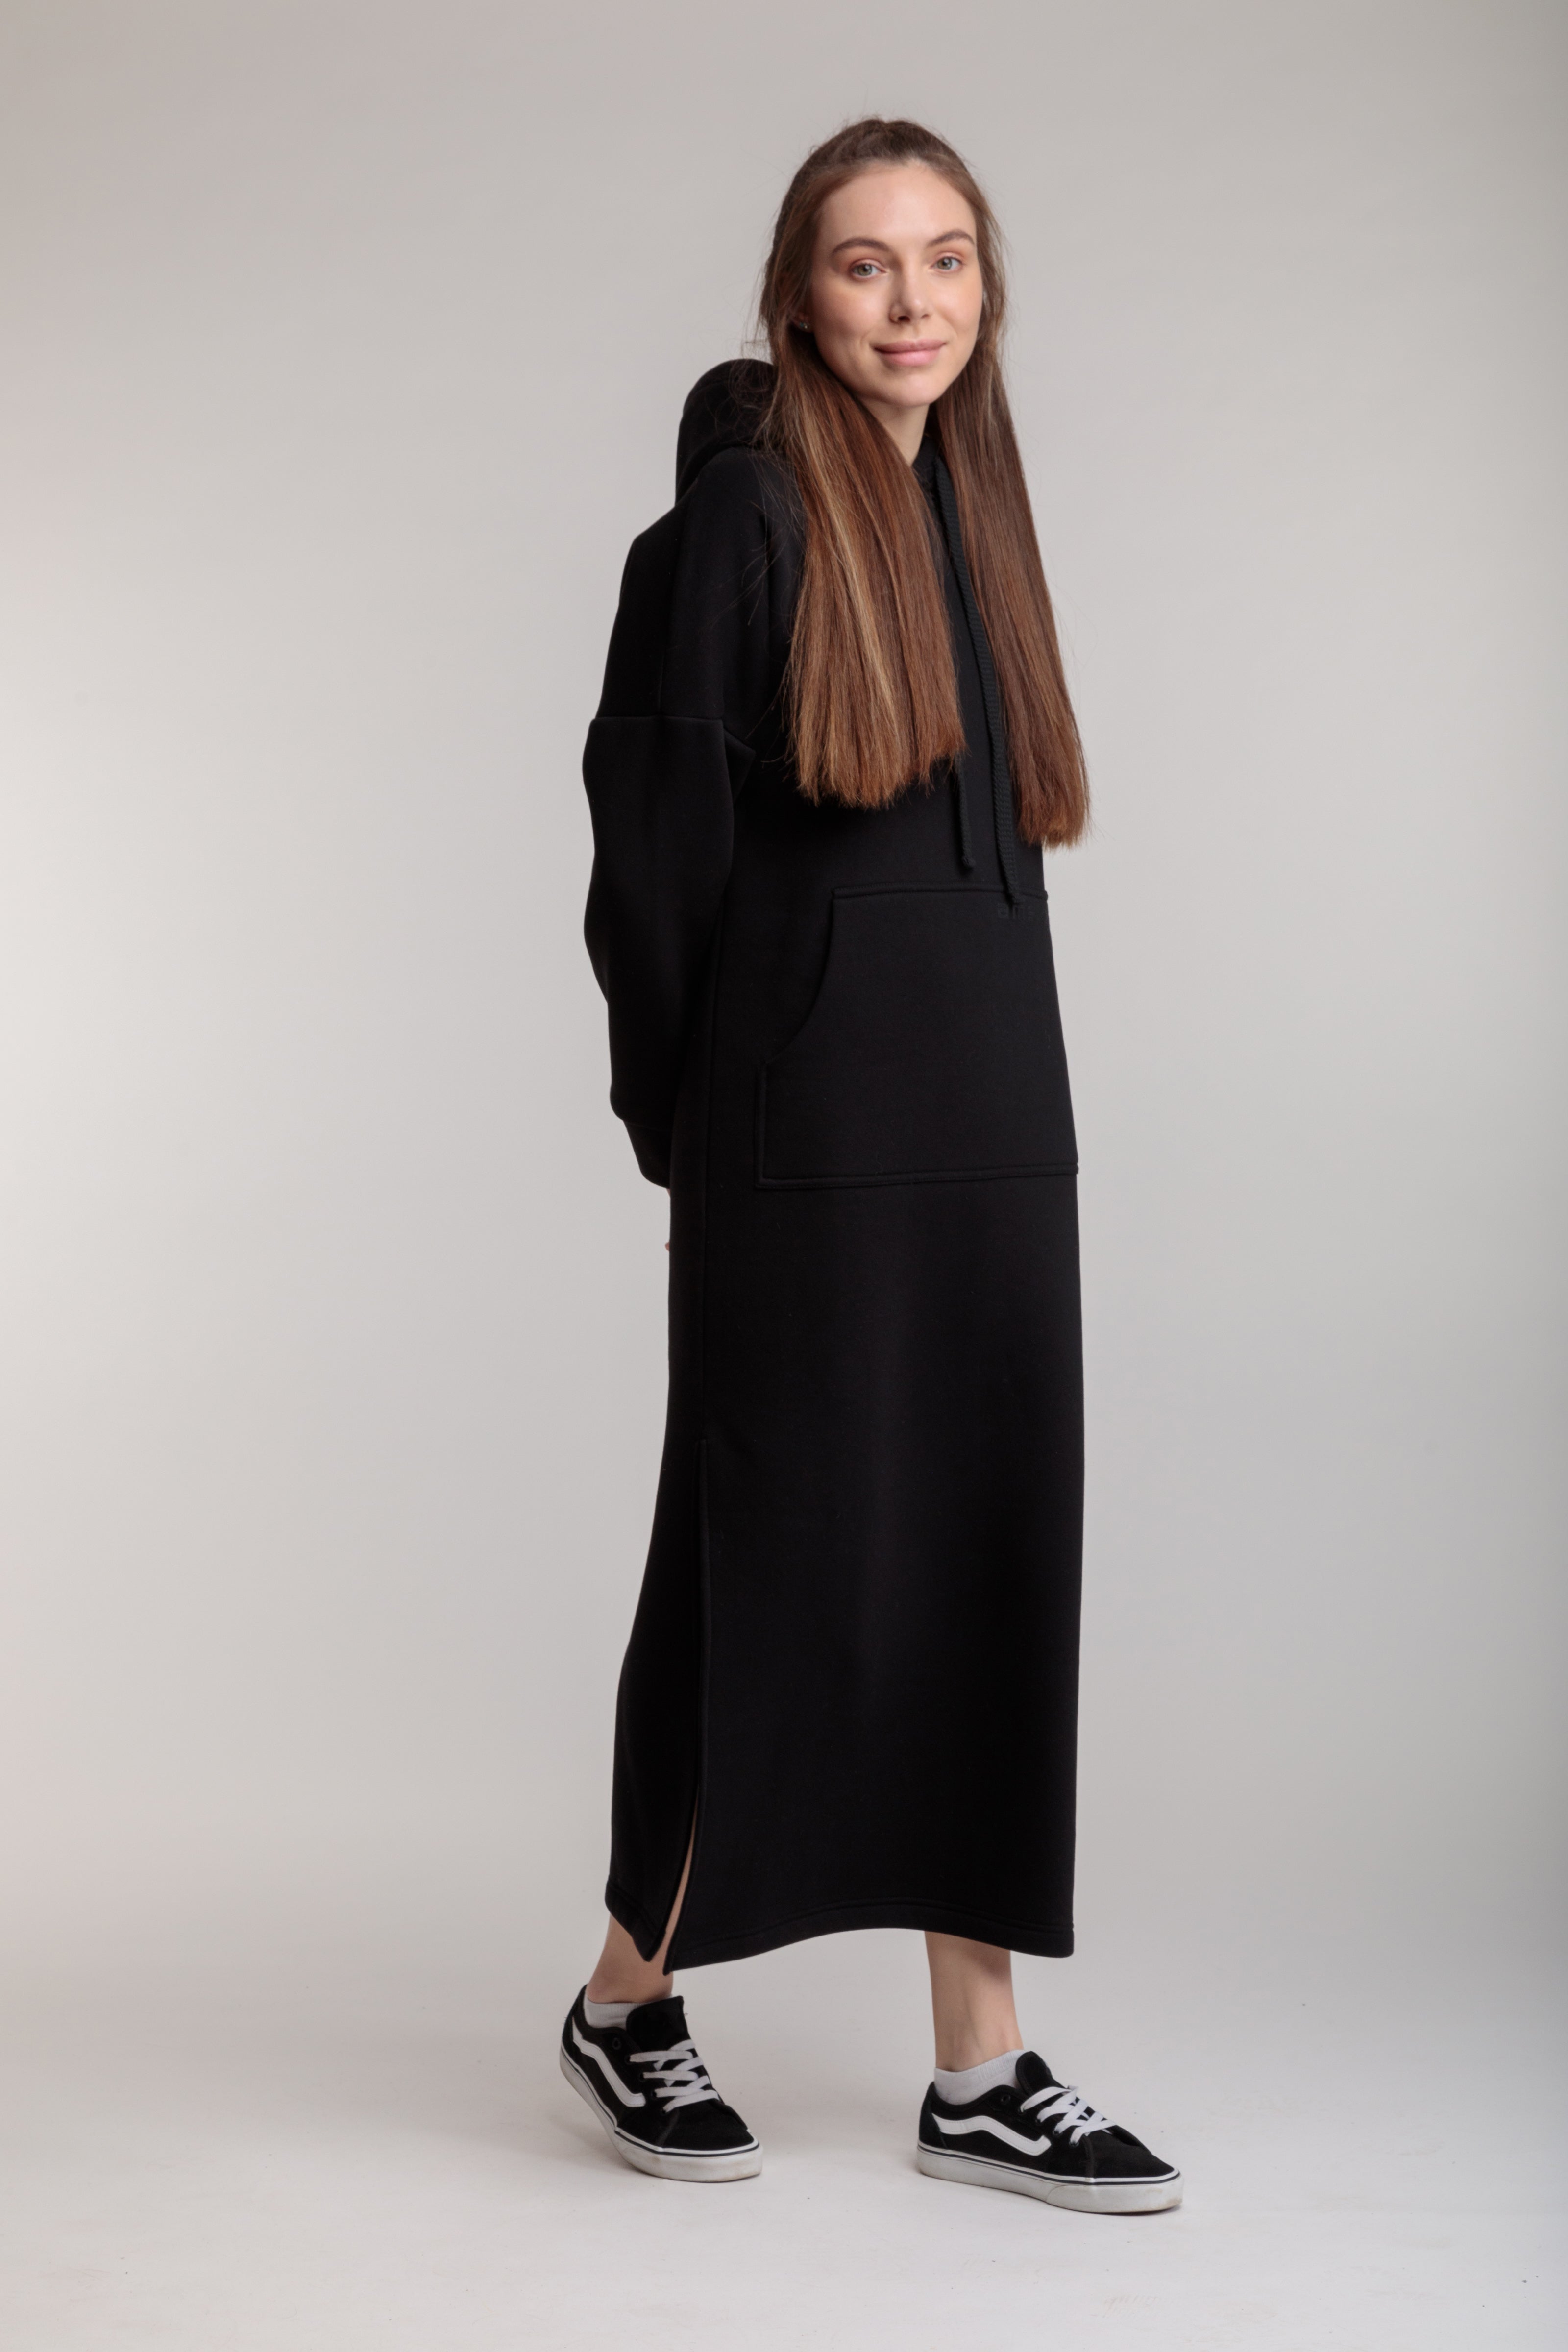 Long straight warm dress in black color with slits, hood and pocket